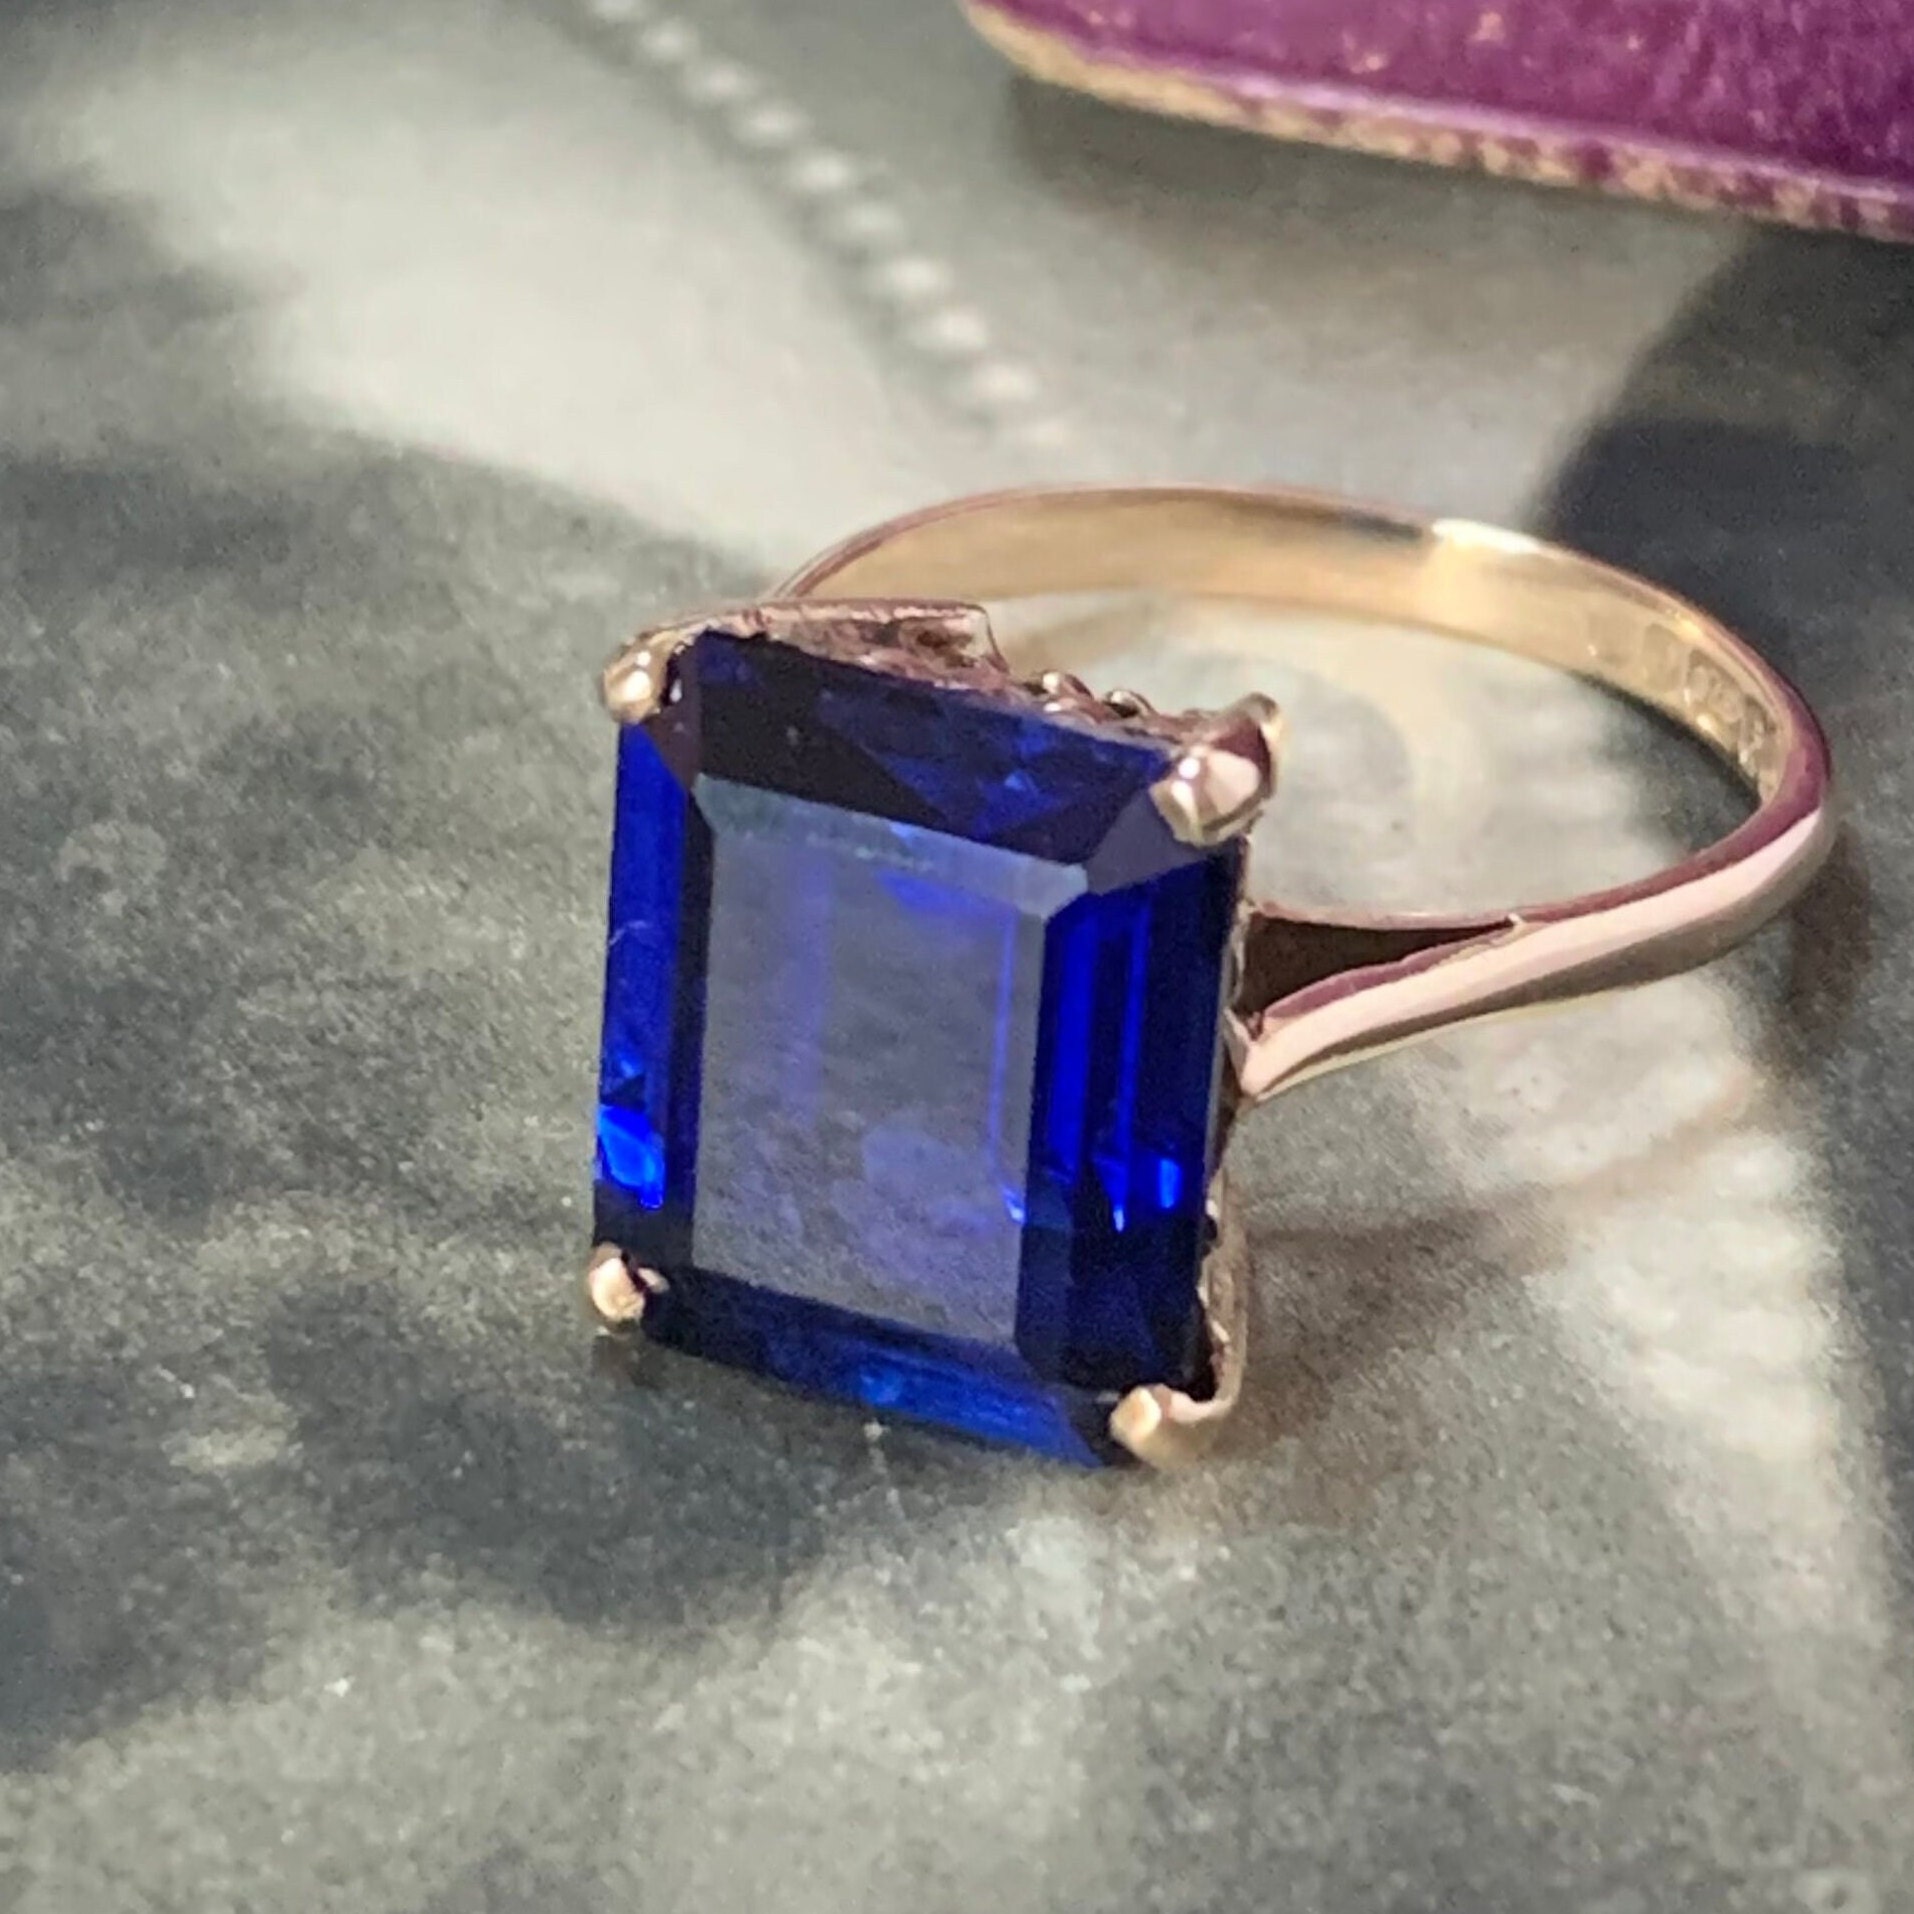 Emerald Cut Sapphire Ring. Vintage 1960S Hallmark Solitaire Set in 9Ct Yellow Gold. Amazing Blue Gemstone & Fantastic On The Finger